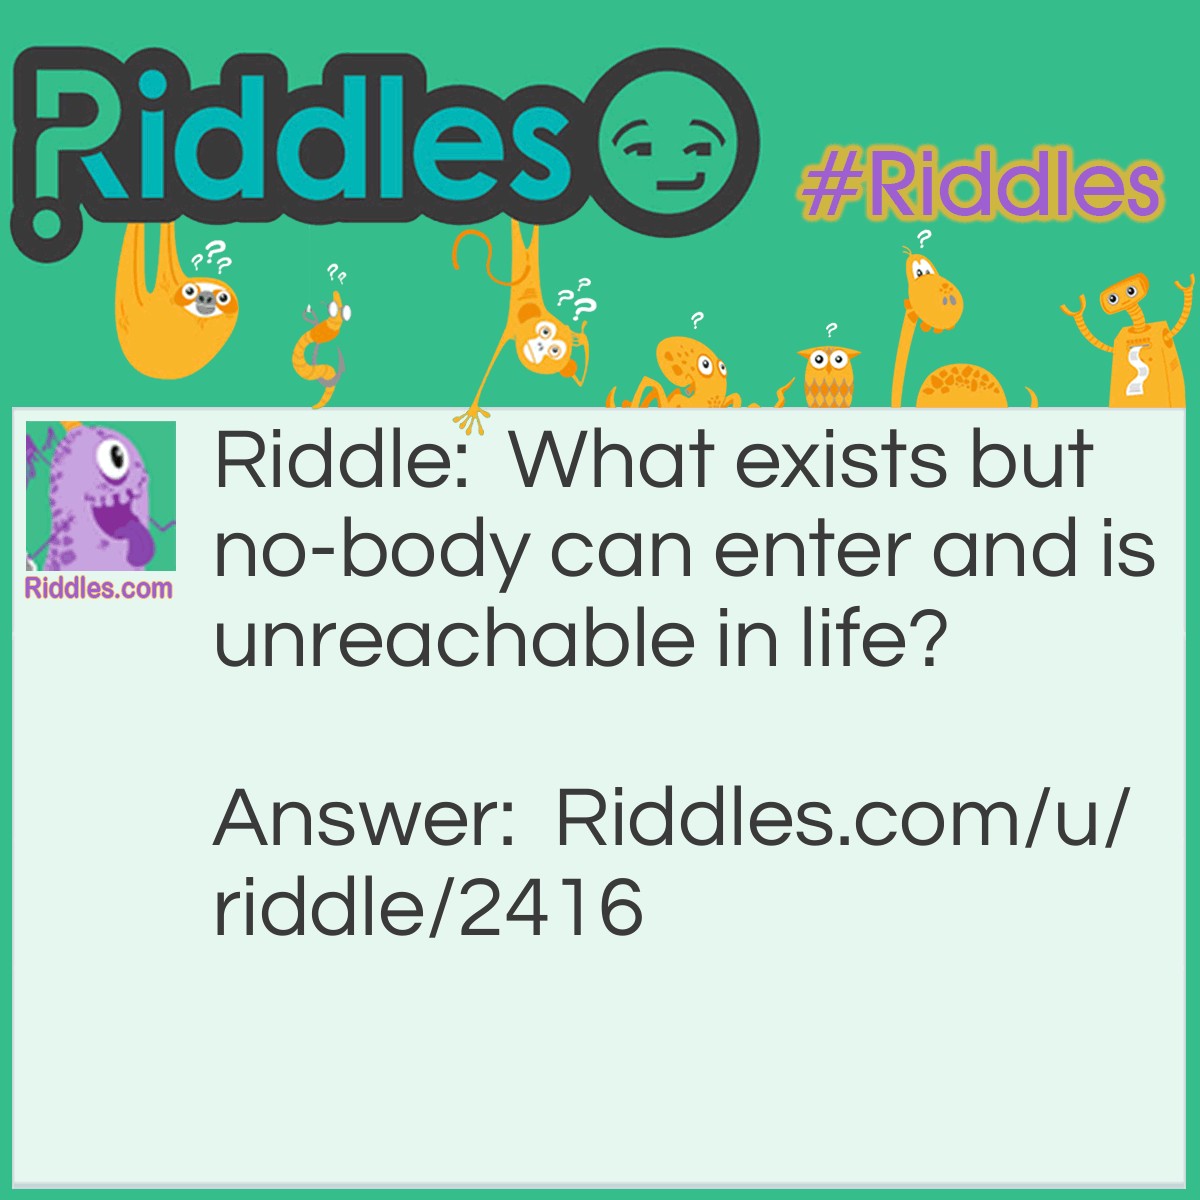 Riddle: What exists but no-body can enter and is unreachable in life? Answer: Heaven.